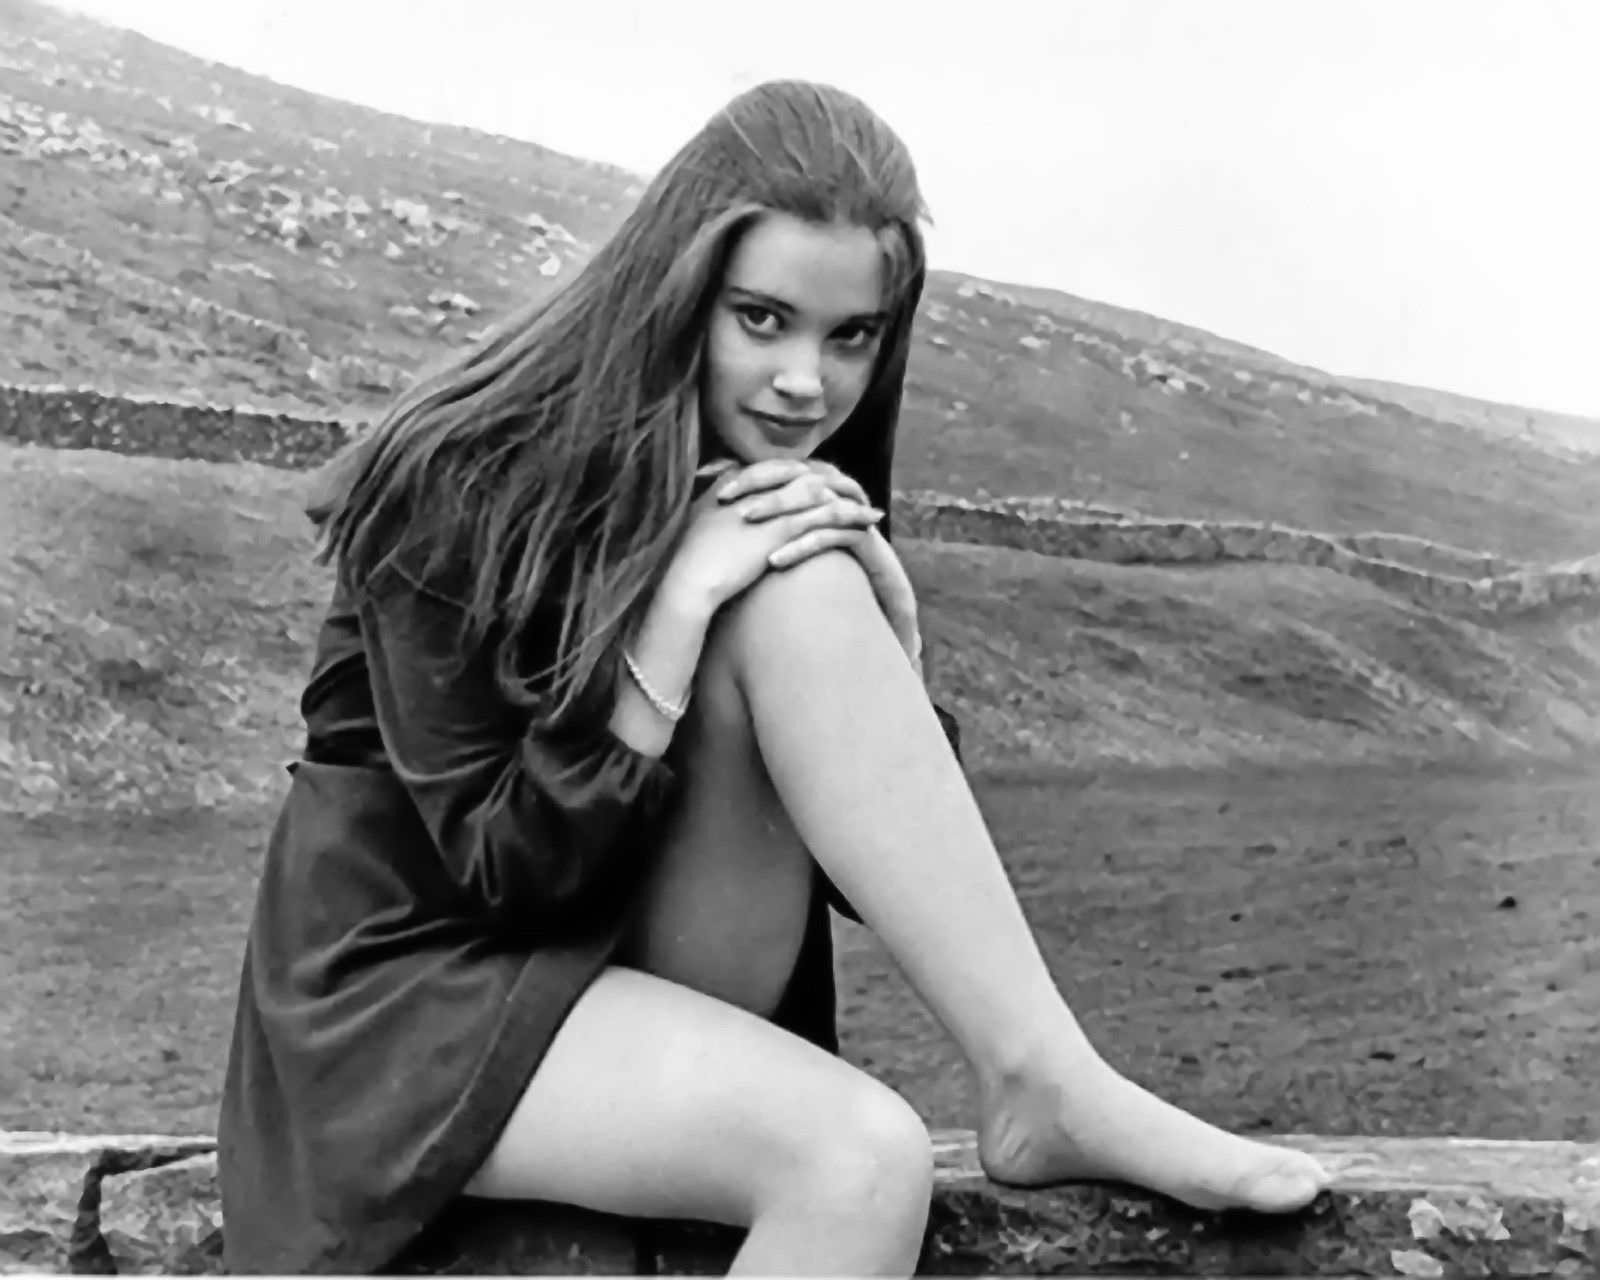 Lynne Frederick on the Set of ‘No Blade of Grass’, 1970.